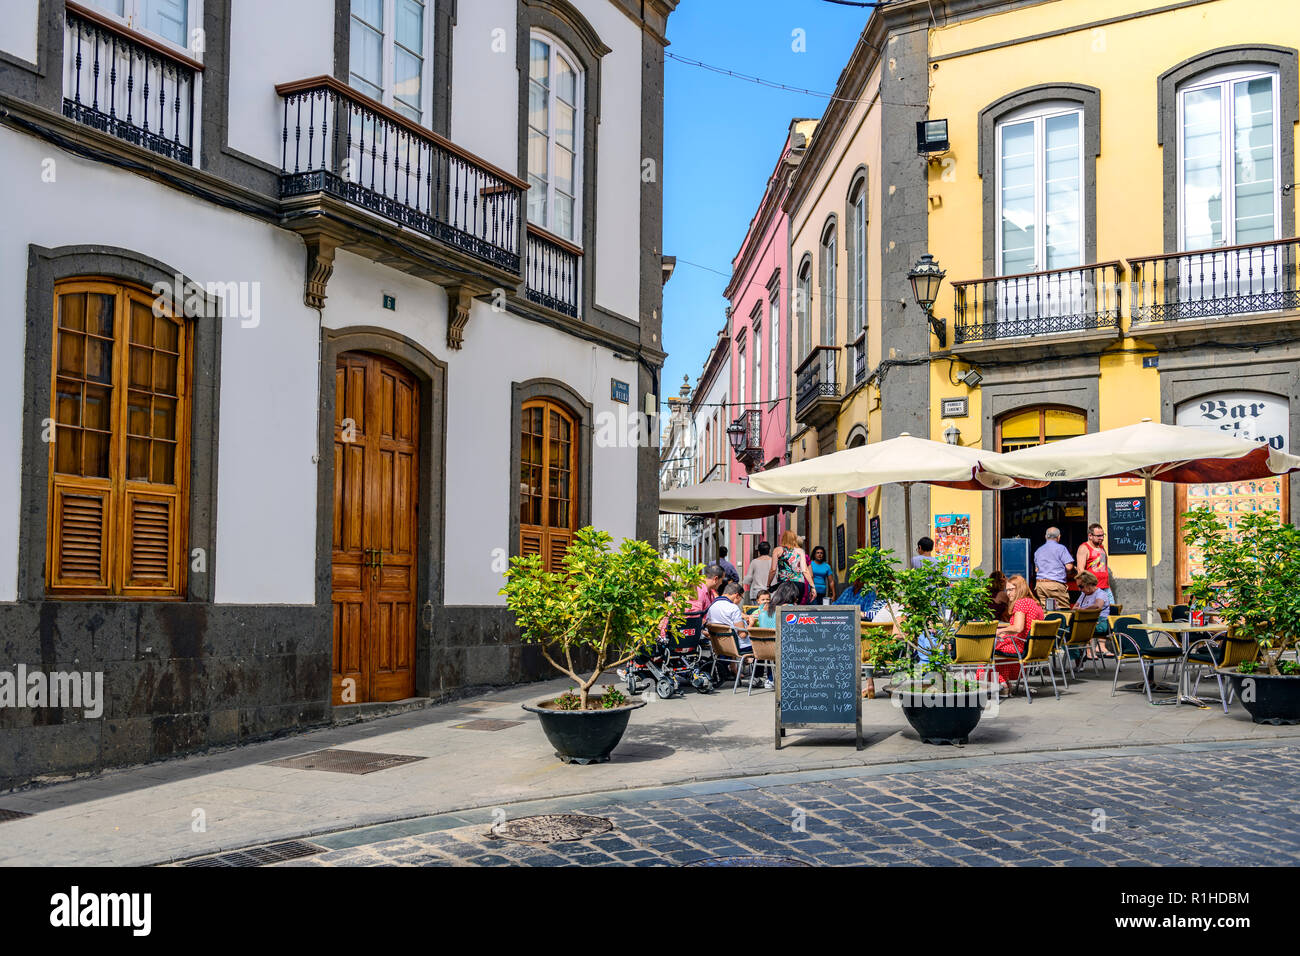 people eating and drinking at a local bar / cafe, clock street, Arucas, Gran Canaria Stock Photo